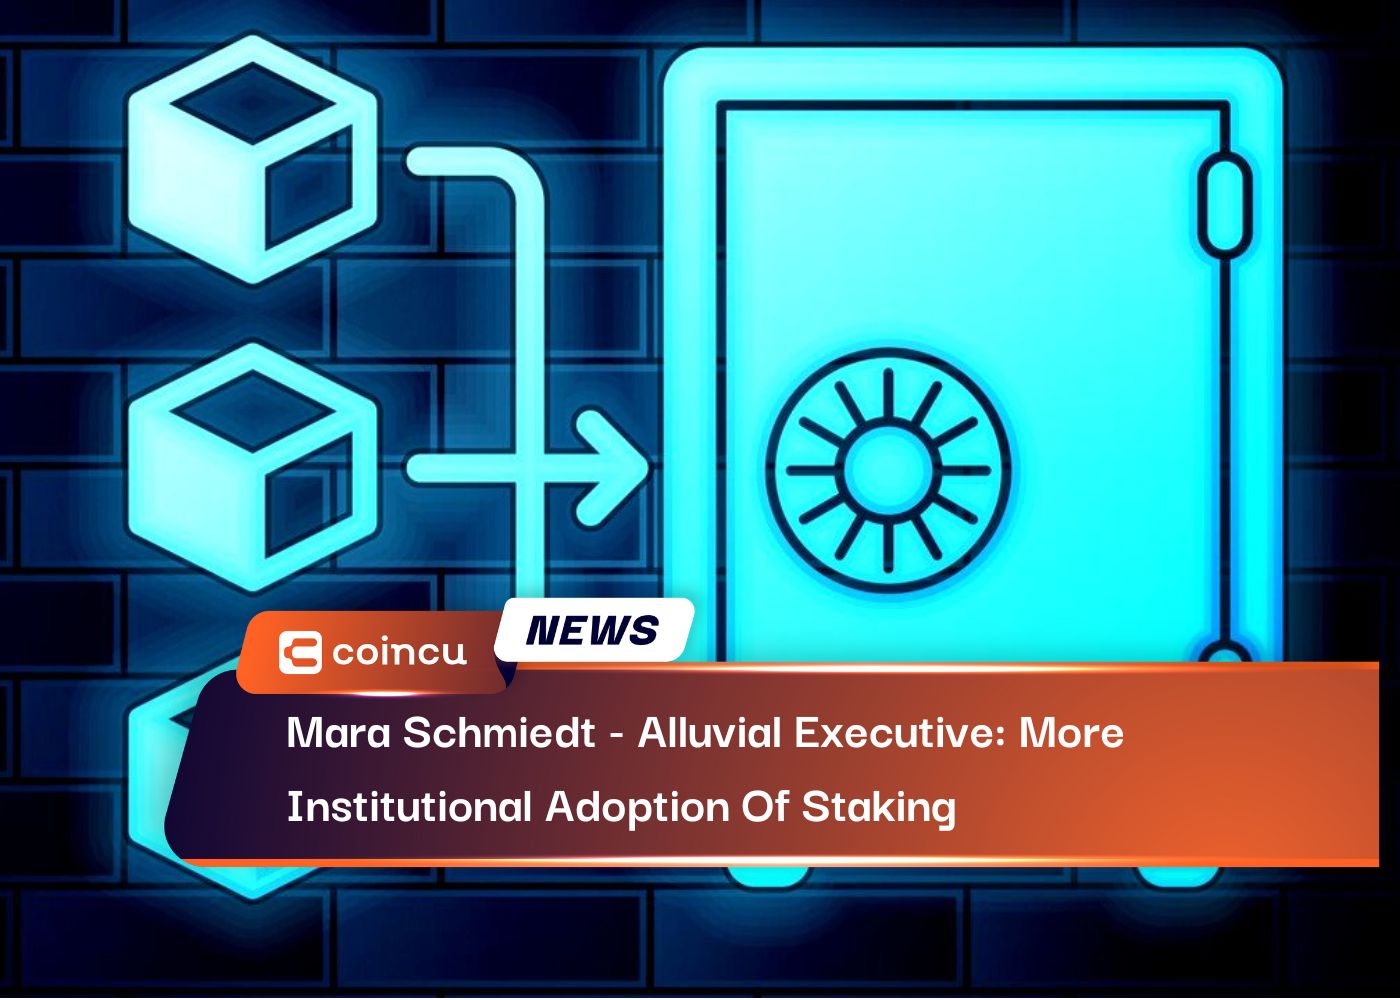 Mara Schmiedt - Alluvial Executive: More Institutional Adoption Of Staking